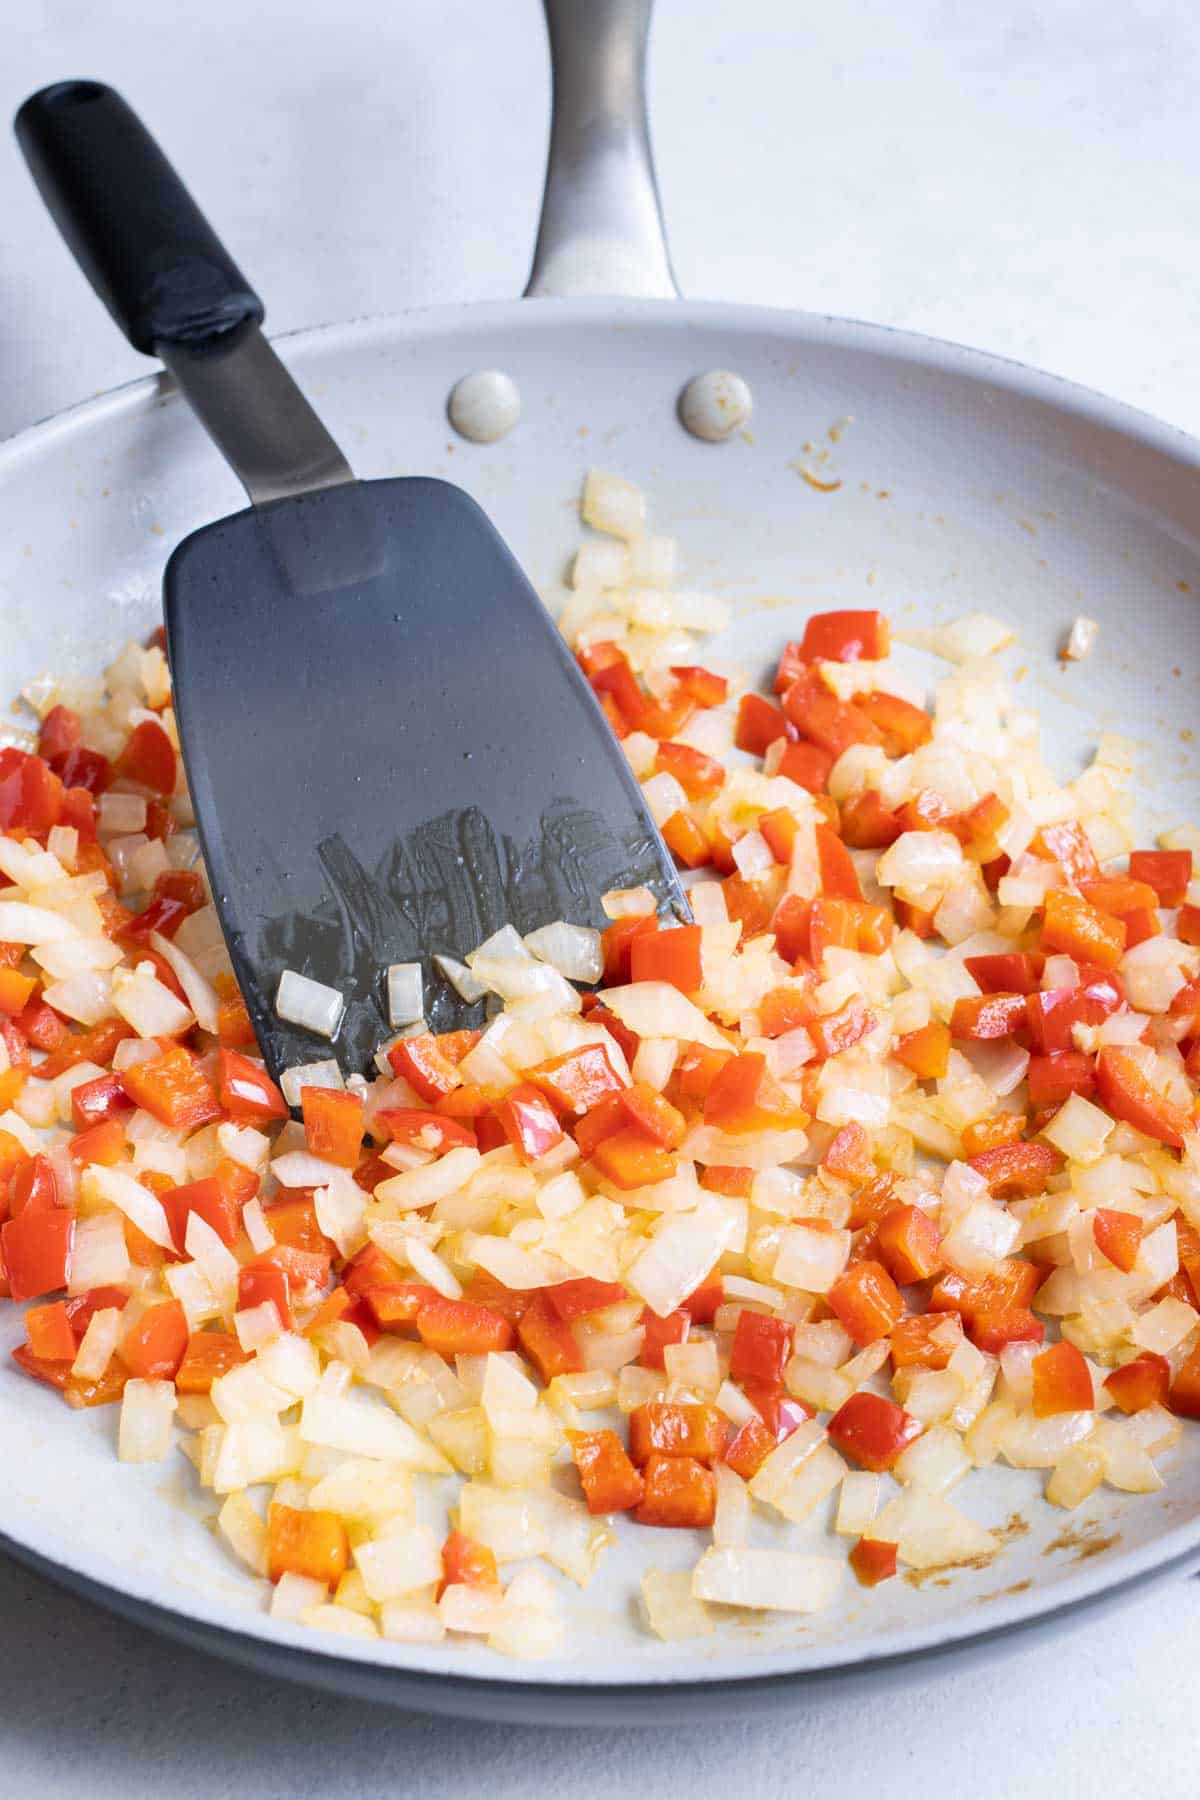 Onions and bell pepper are cooked in a skillet.